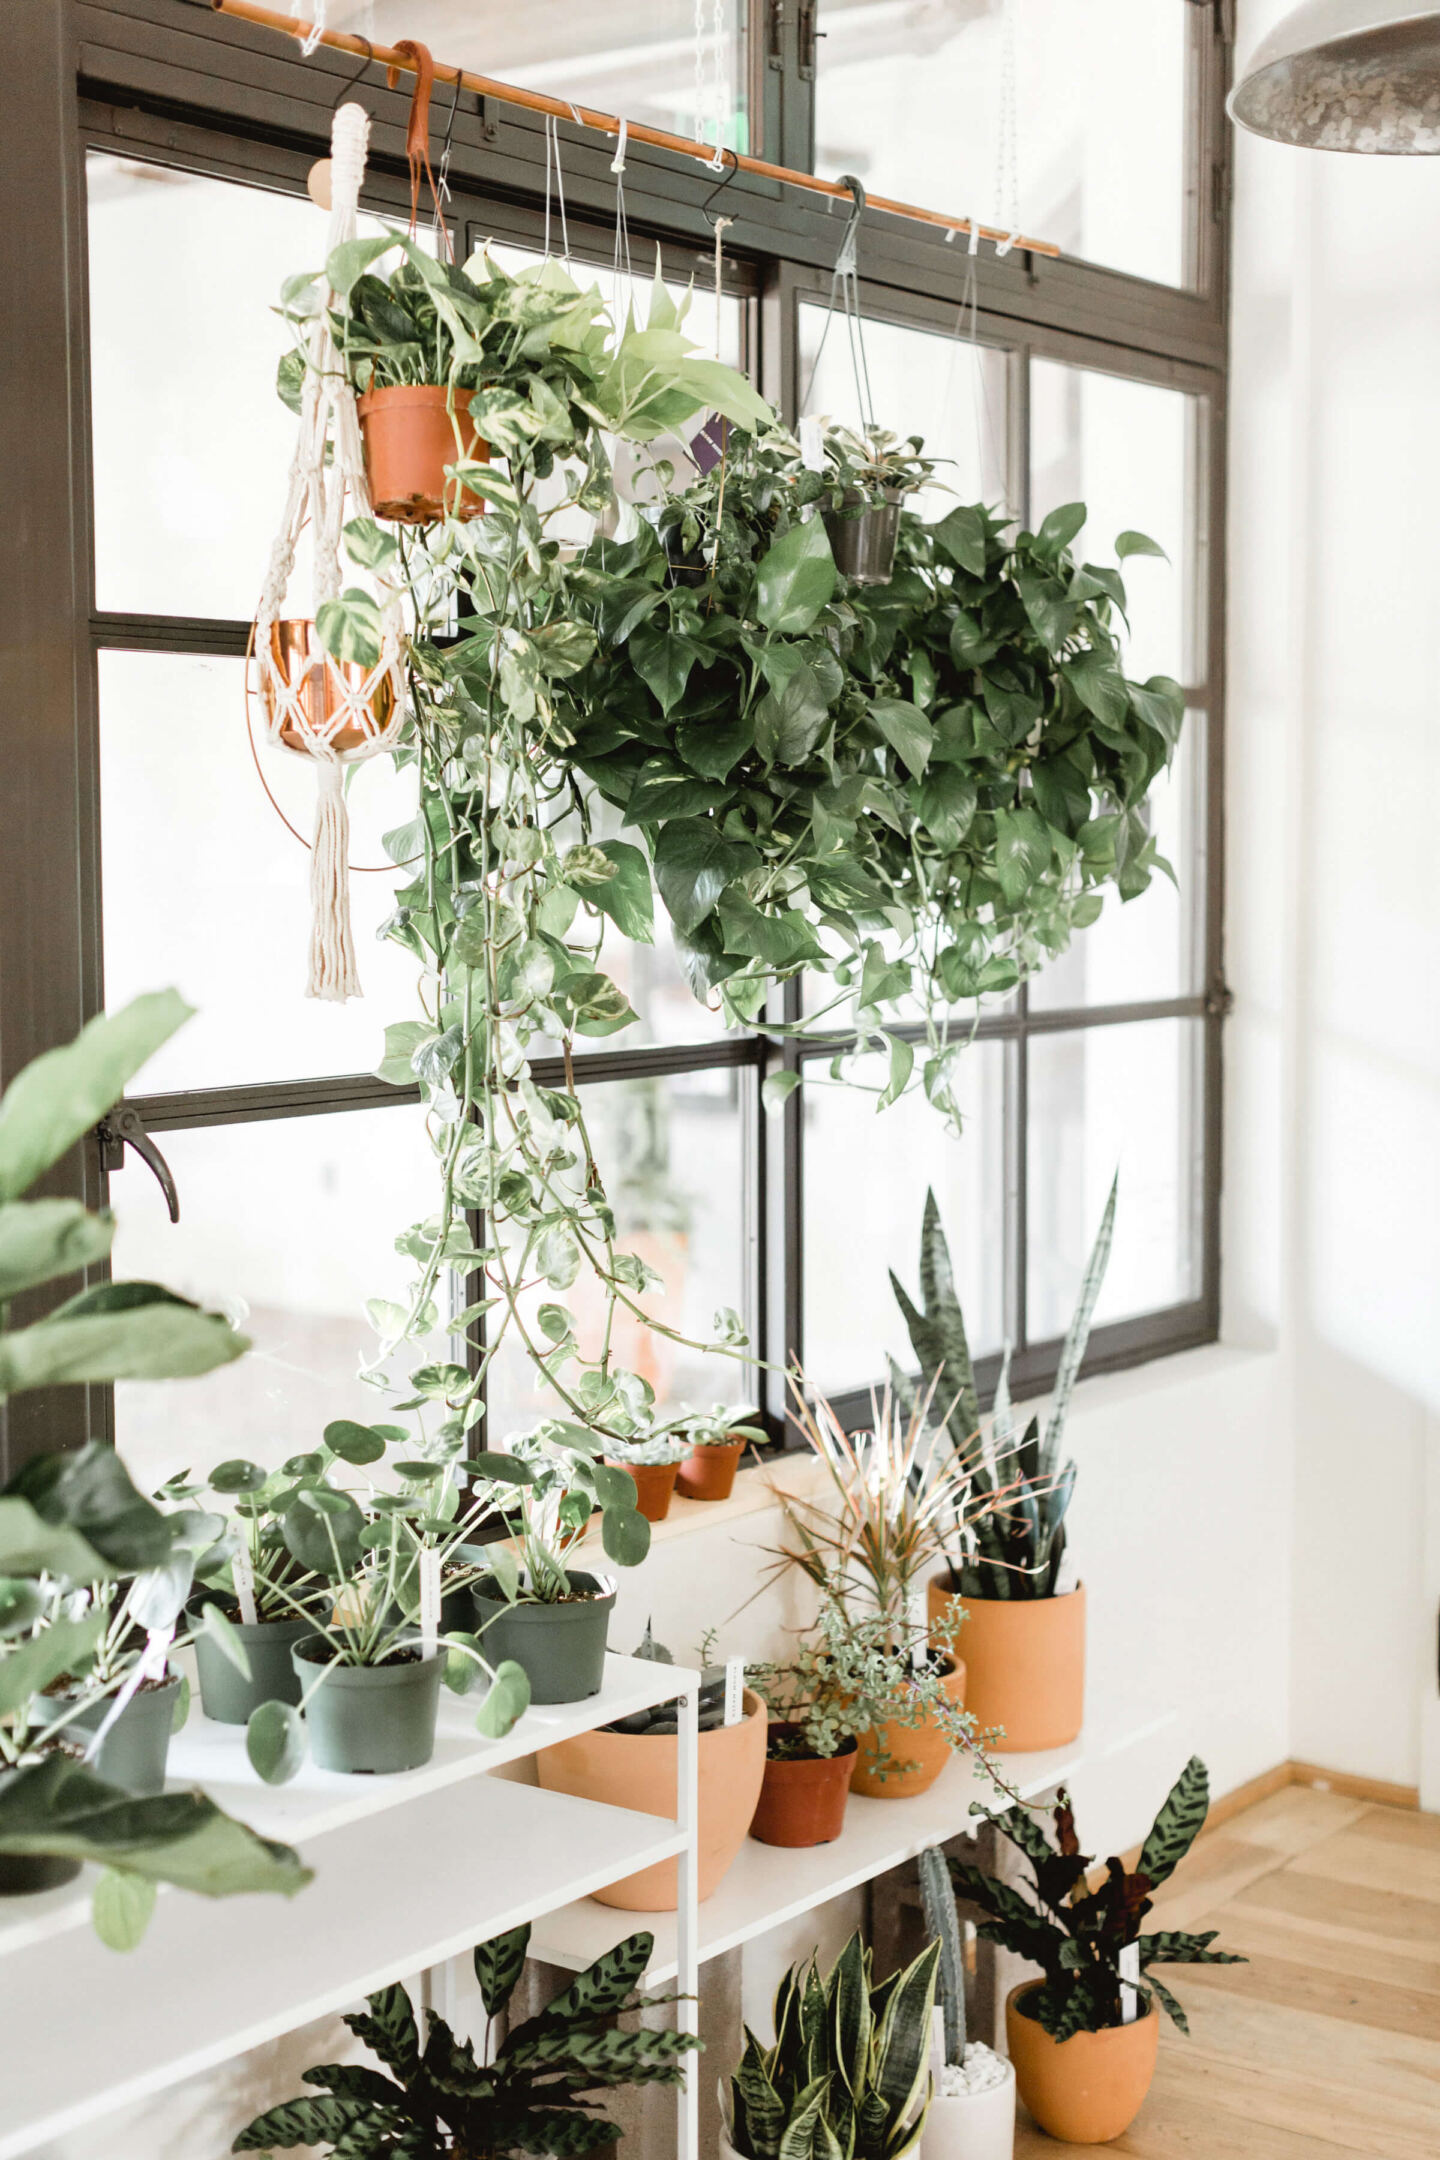 Houseplants suspended in front of a window and placed on shelving below the window